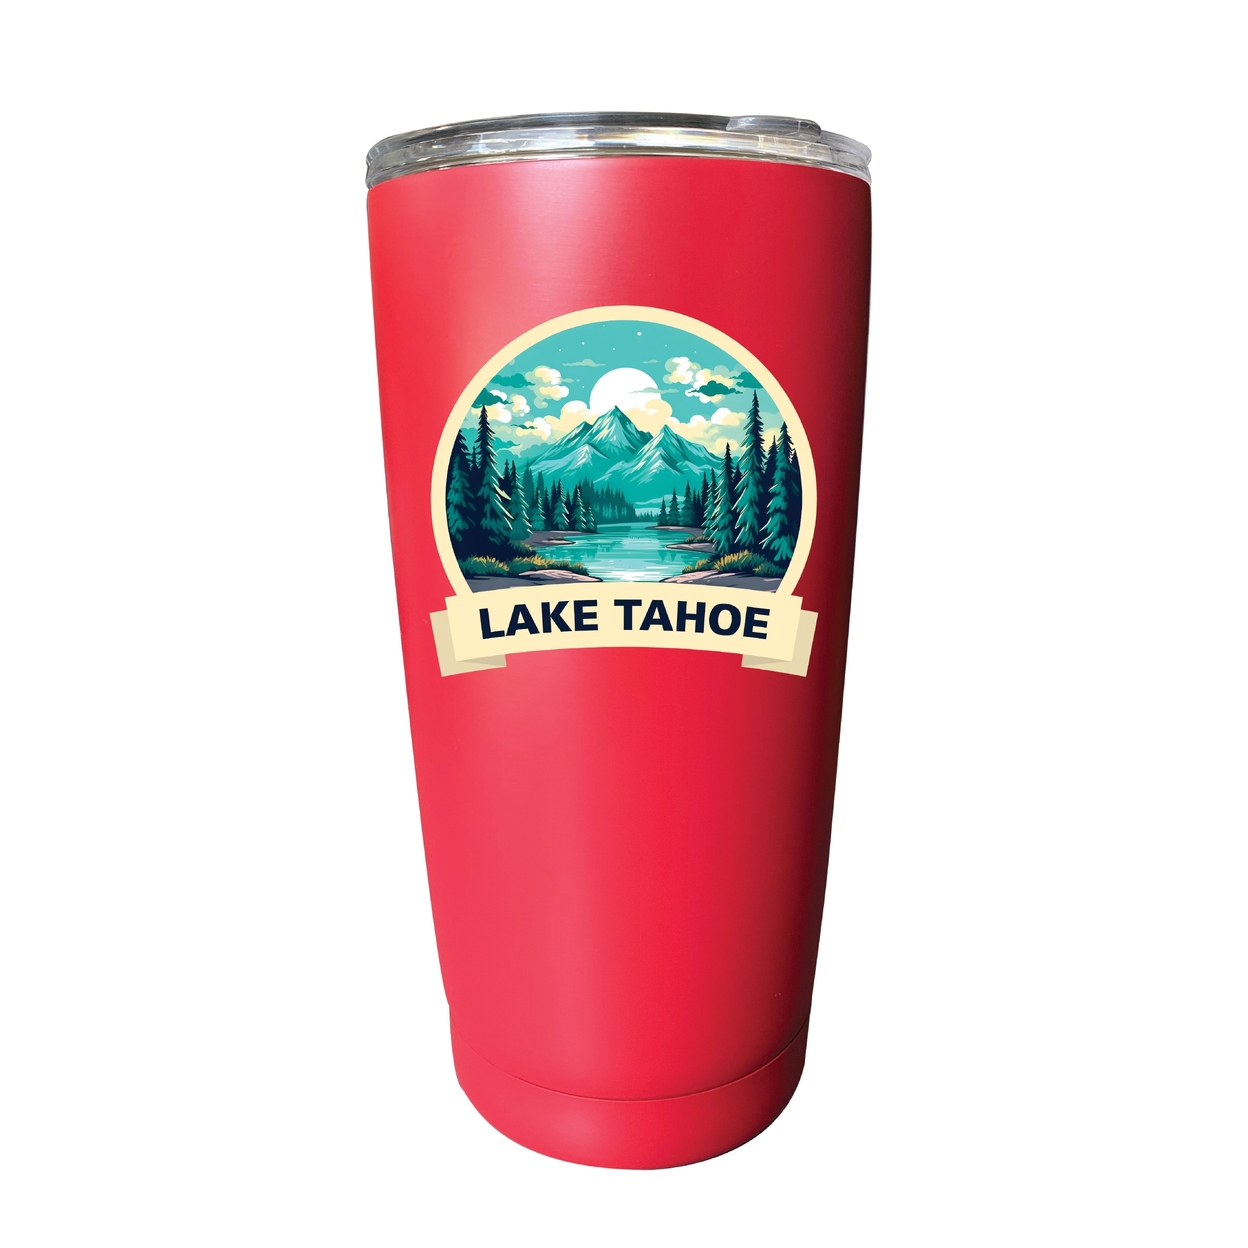 Lake Tahoe California Souvenir 16 Oz Stainless Steel Insulated Tumbler - Red,,2-Pack